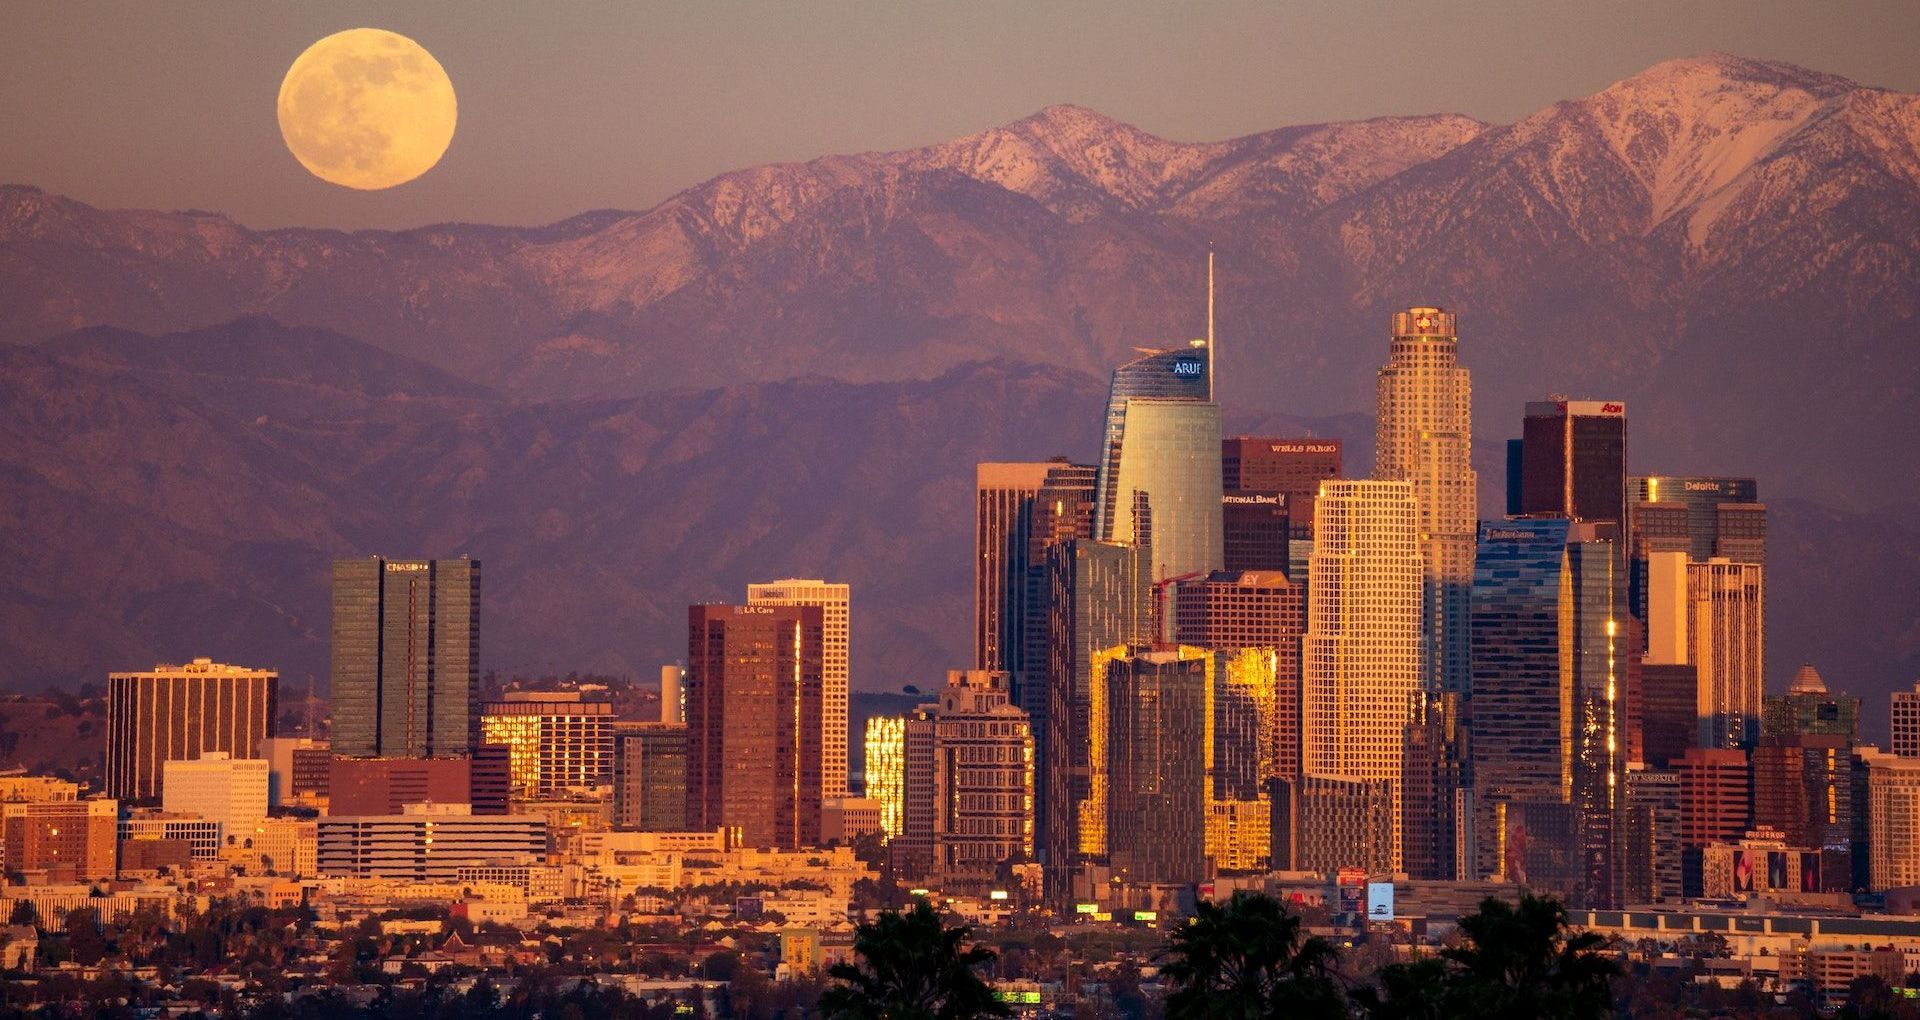 photo of the city skyline of Los Angeles against scenic mountain and moon background